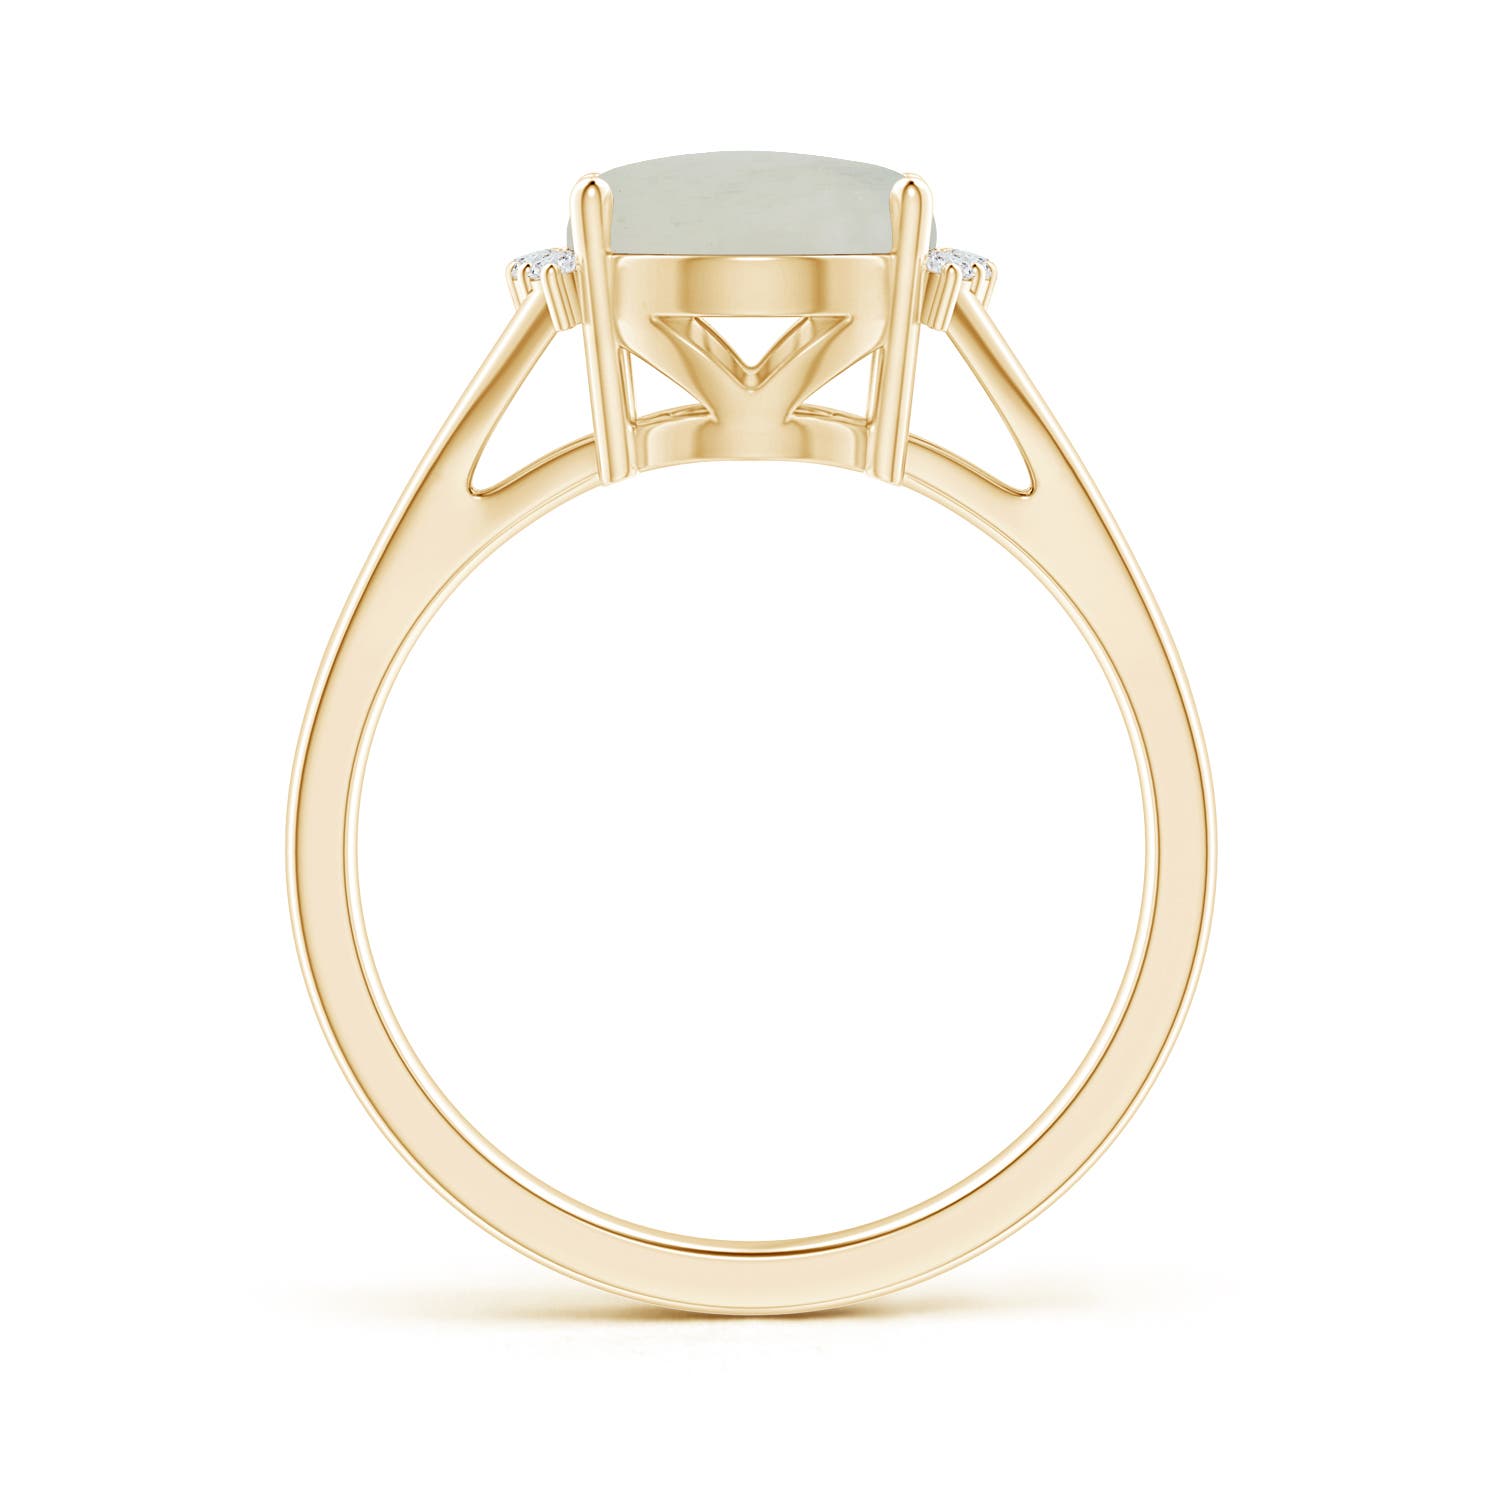 A - Moonstone / 2.6 CT / 14 KT Yellow Gold